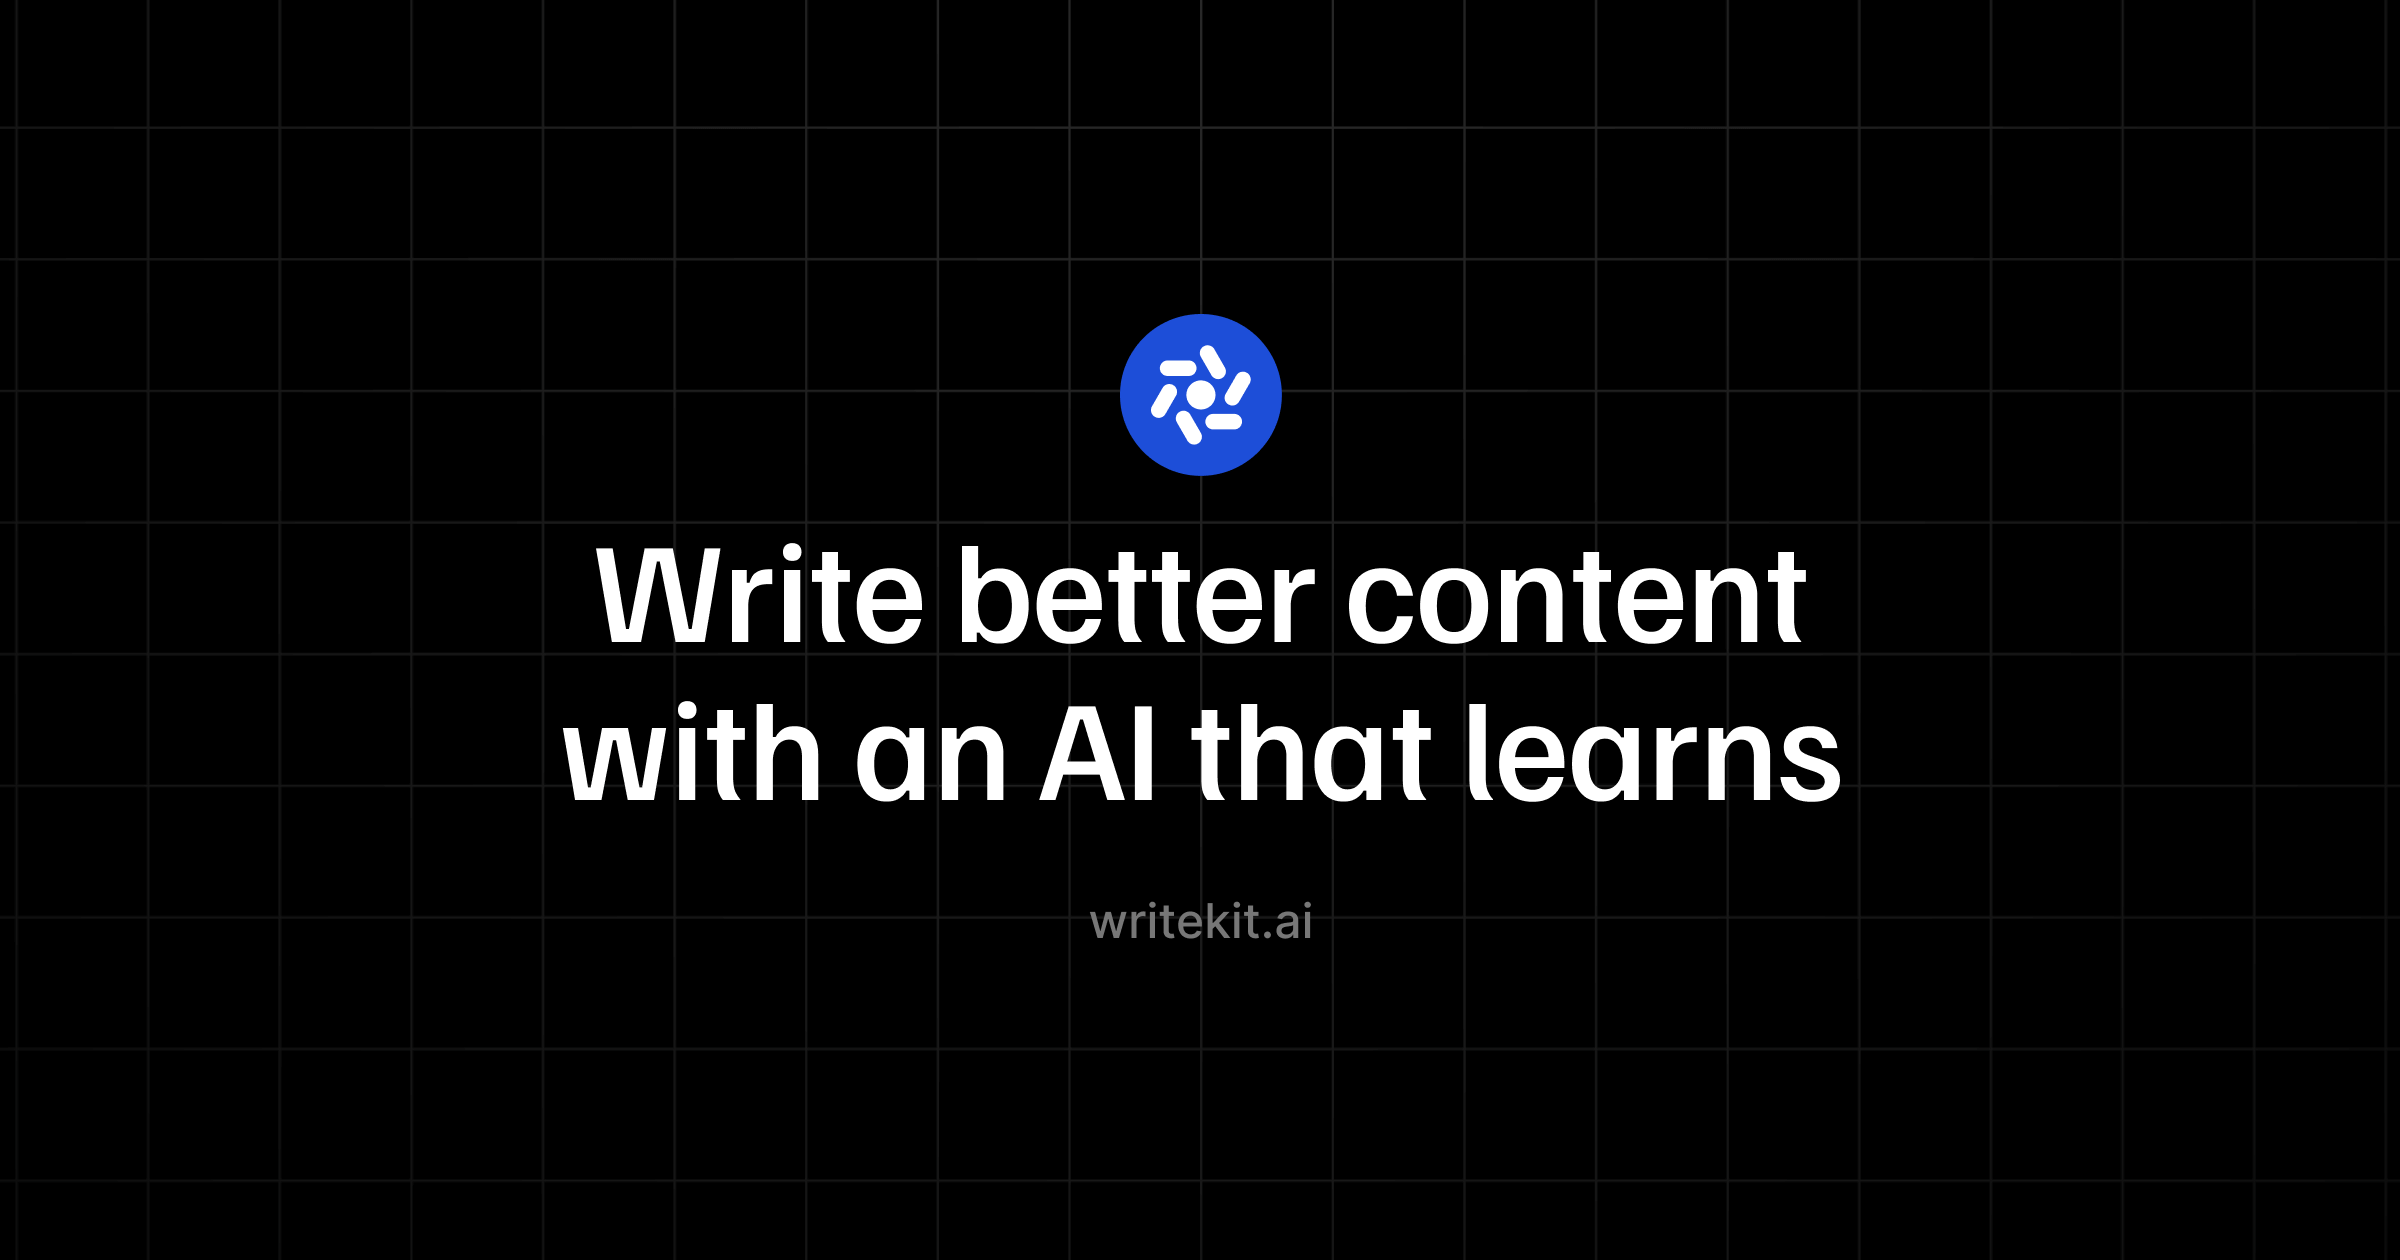 Write better content with an AI that learns